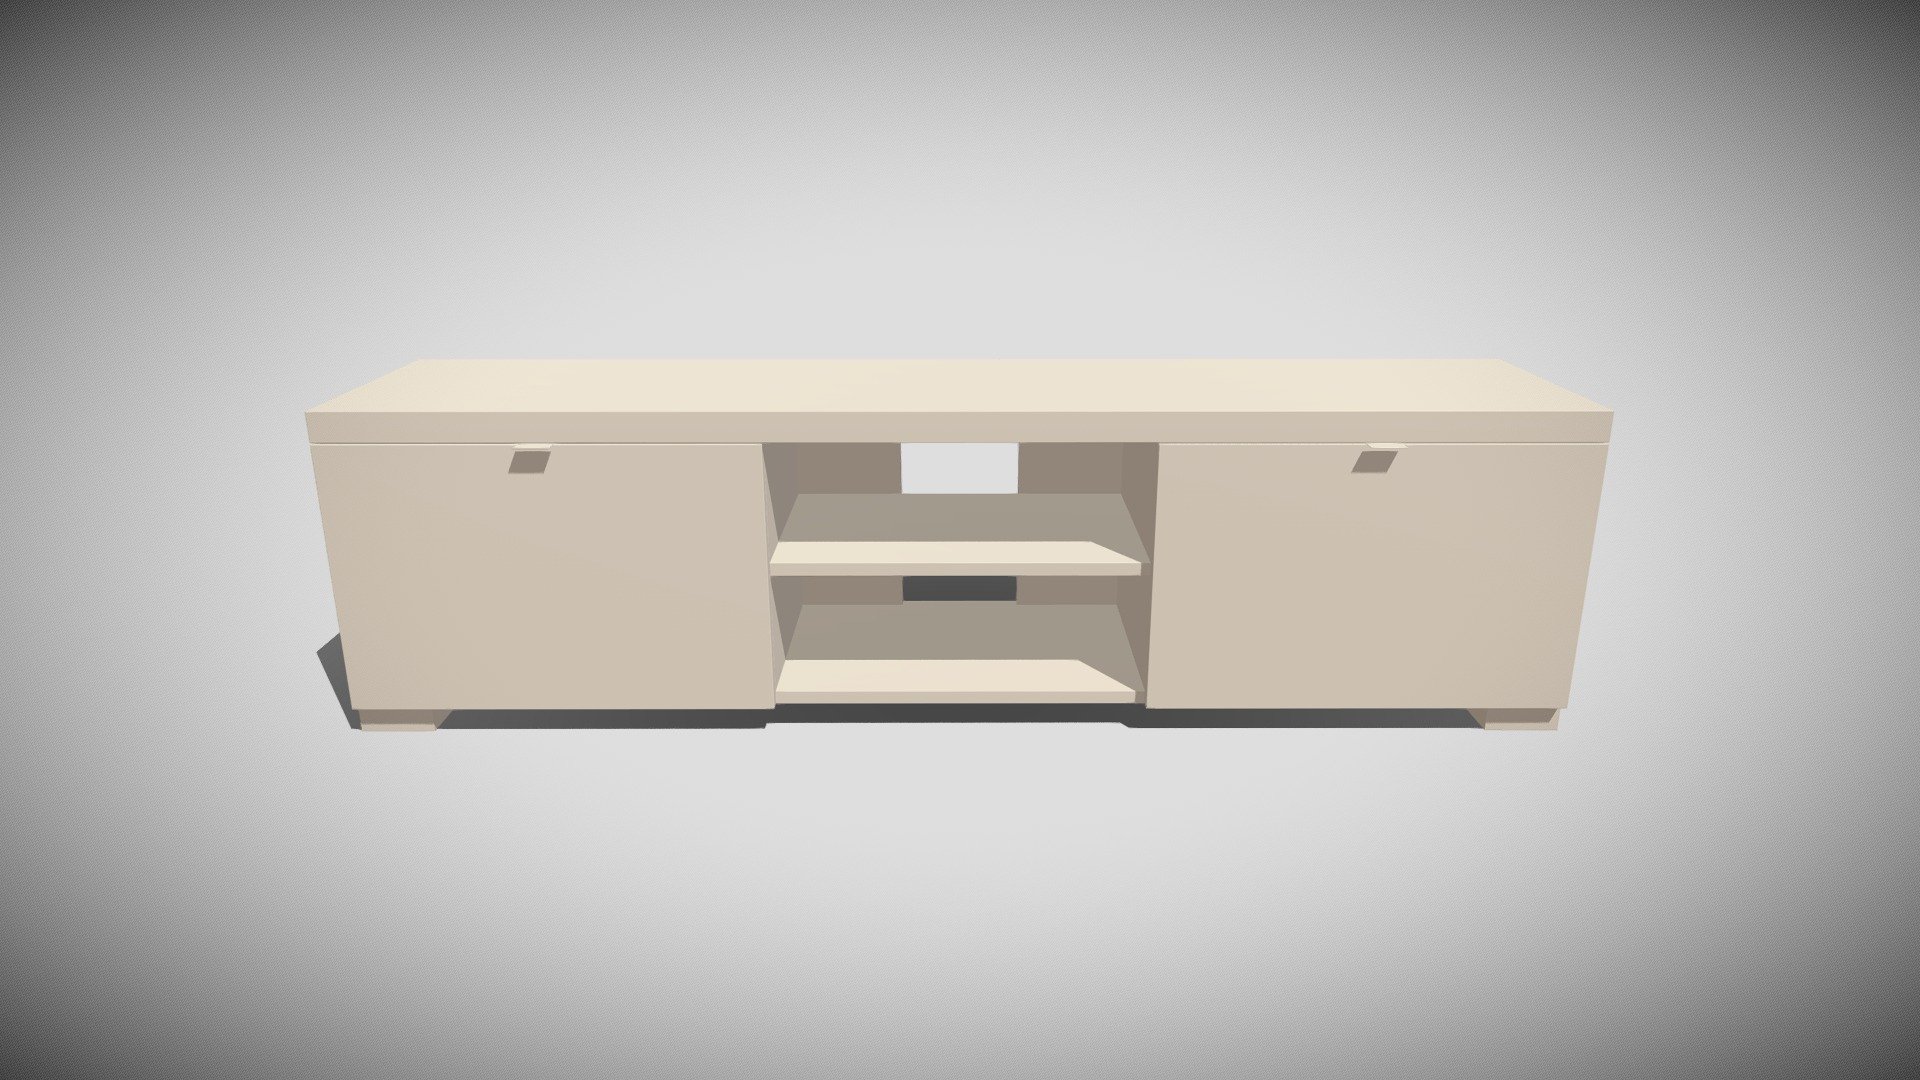 Detailed model of a TV Stand, modeled in Cinema 4D.The model was created using approximate real world dimensions.

The model has 1,386 polys and 1,436 vertices.

An additional file has been provided containing the original Cinema 4D project files and other 3d export files such as 3ds, fbx and obj 3d model